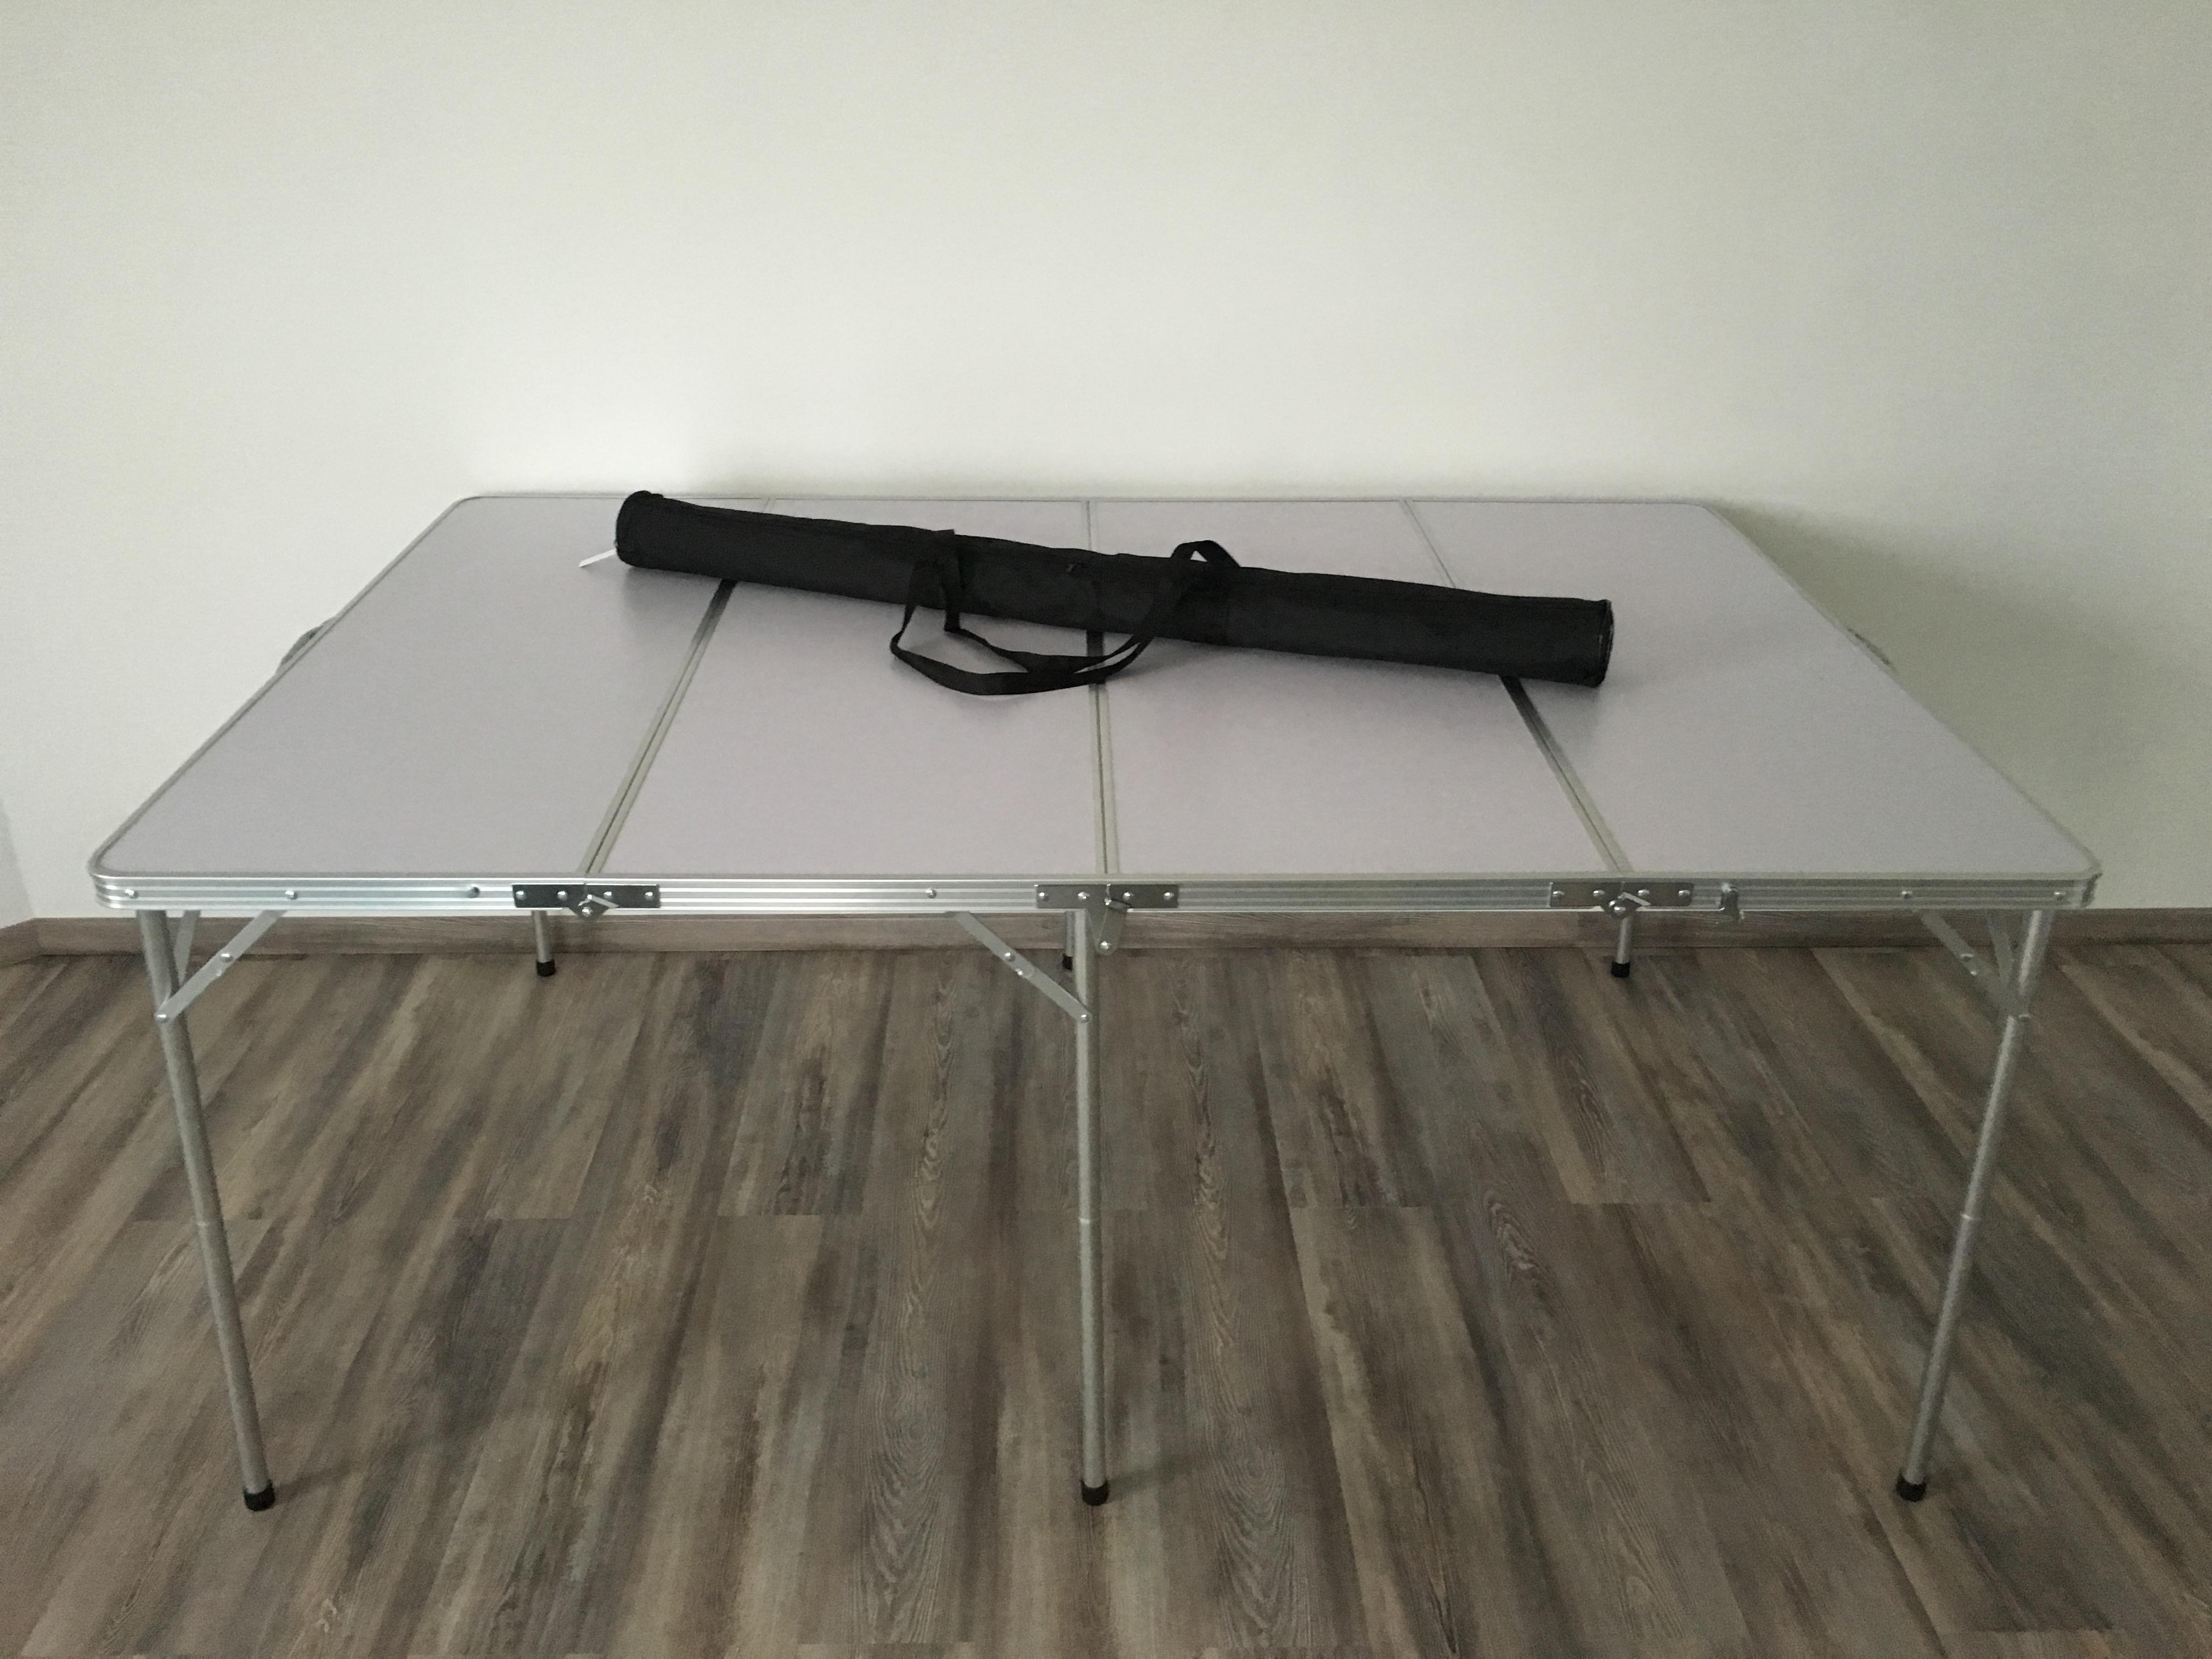 6'x4' folding and portable TABLE – OnTableTop – Home of Beasts War